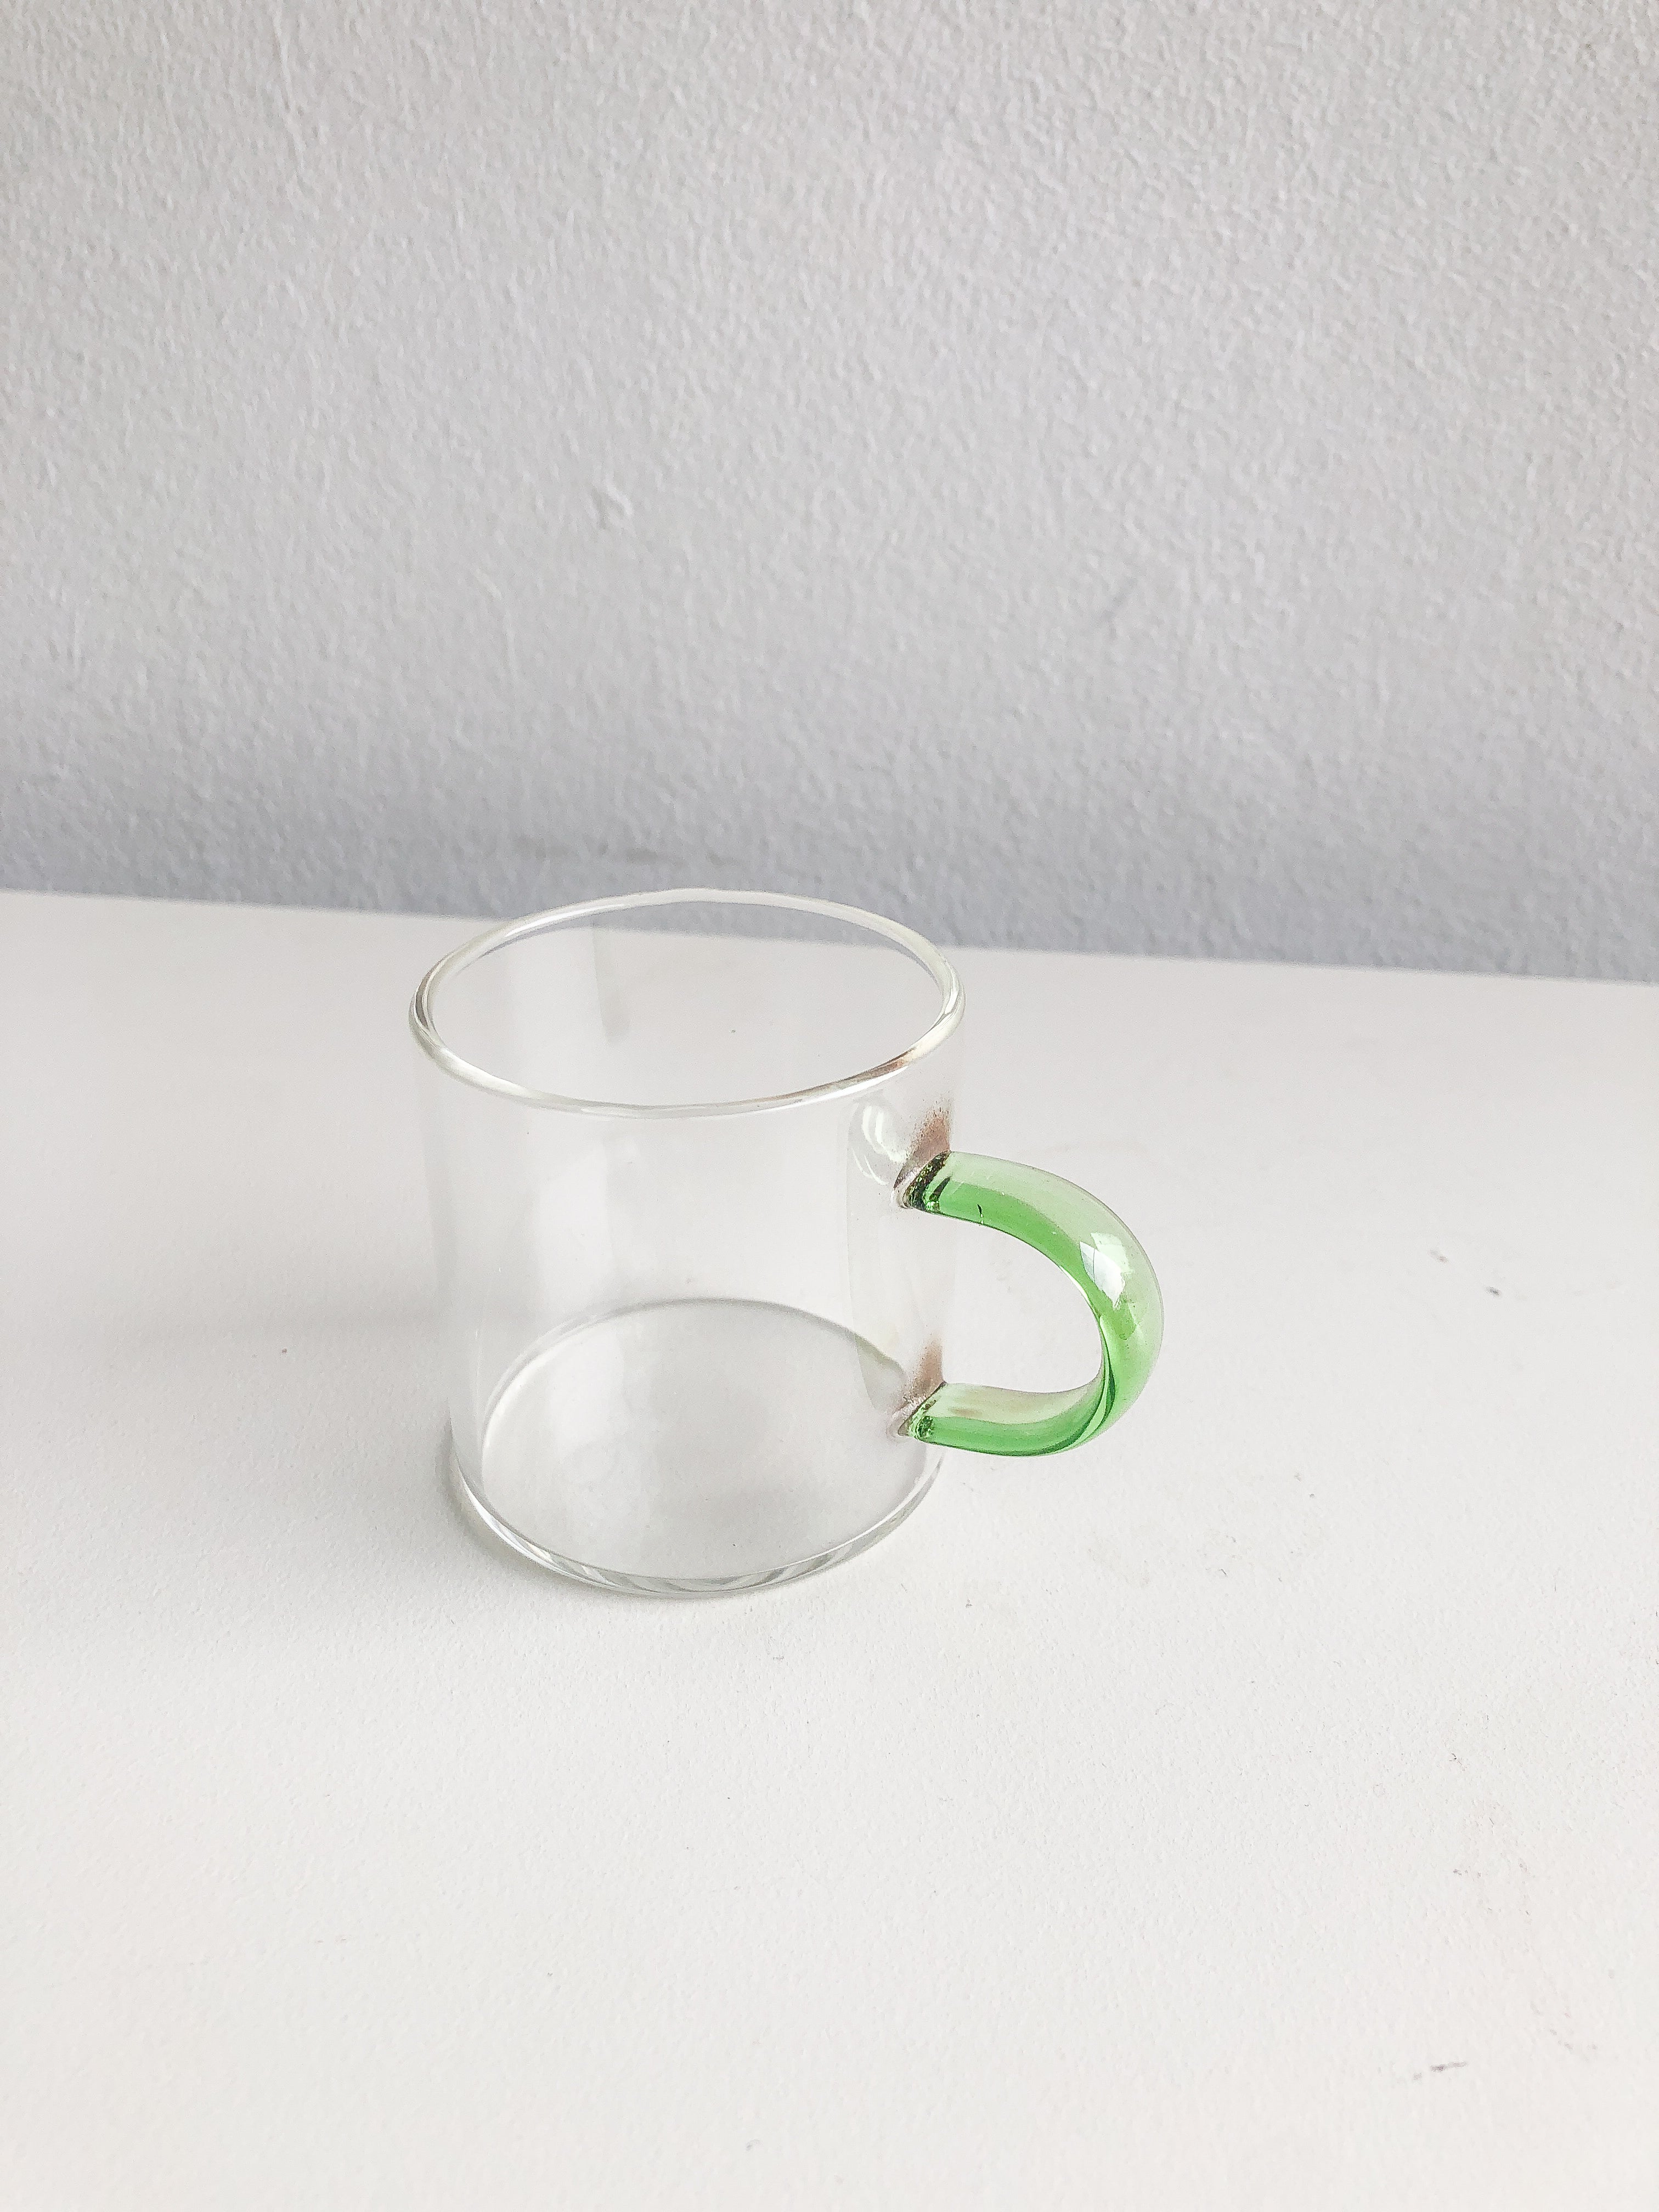 Accent Macchiato Glass in Green by PROSE Tabletop